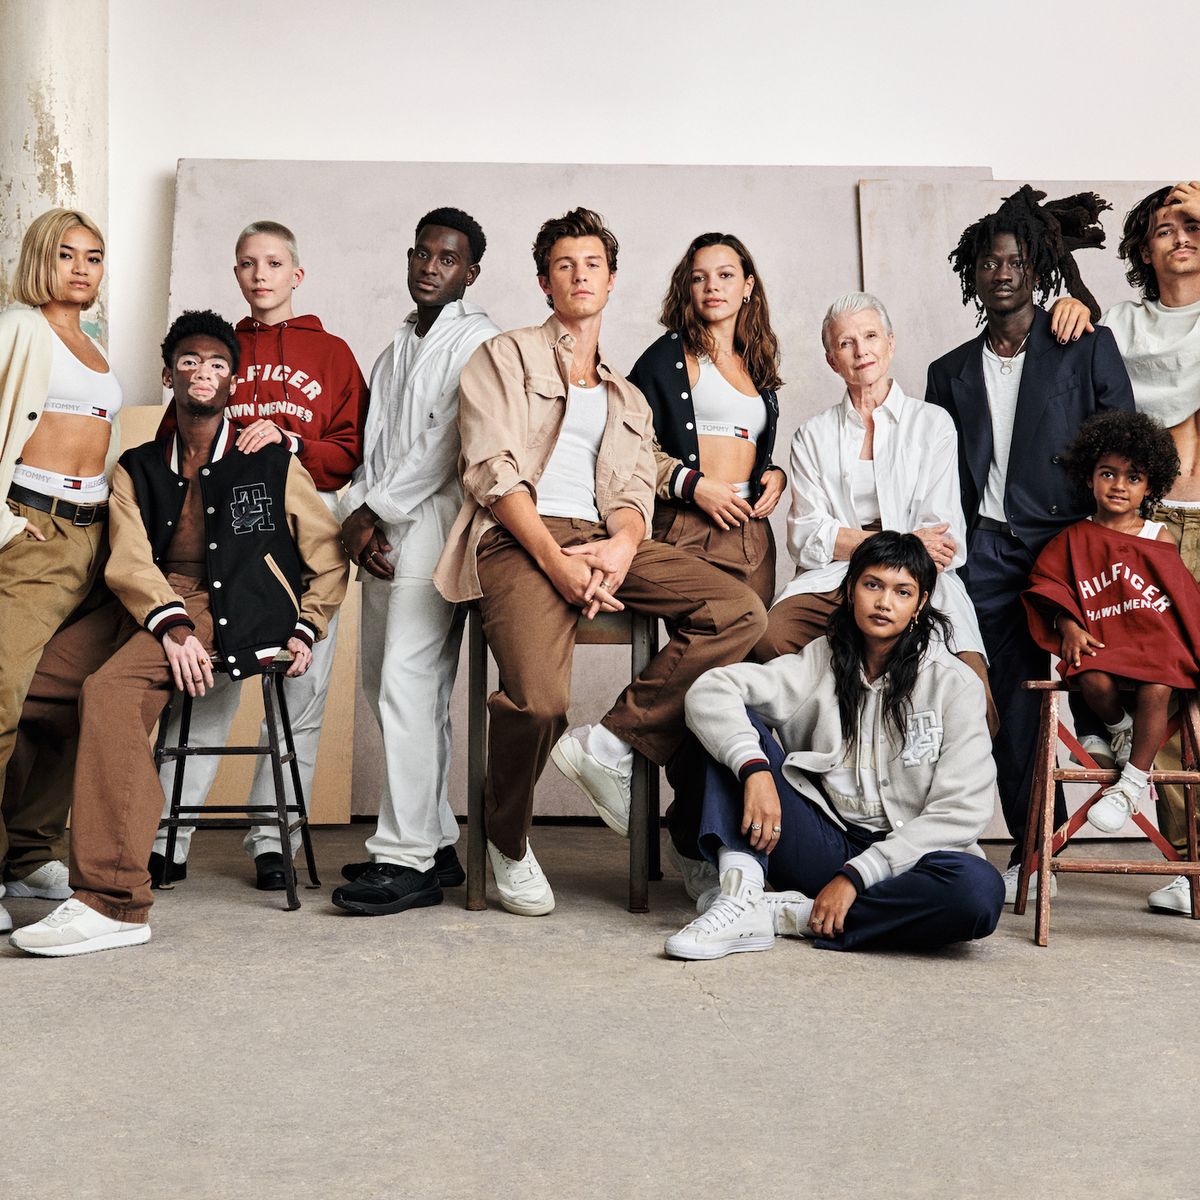 madras Underholdning Forbindelse Meet the Latest Tommy Hilfiger Collection You're Going to Love